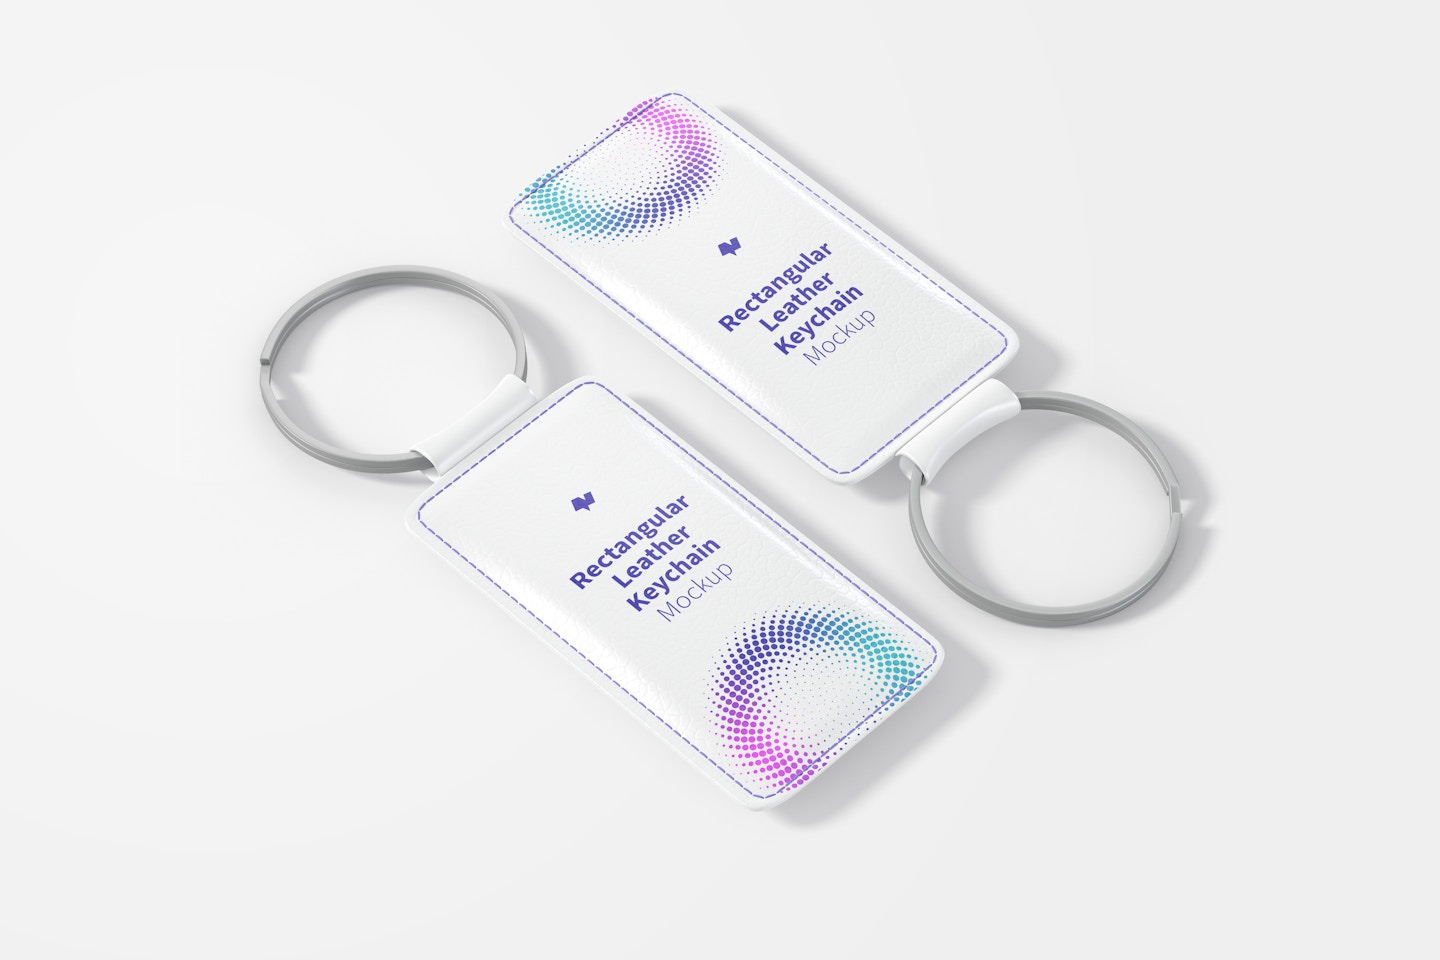 Rectangular Leather Keychains Mockup, Perspective